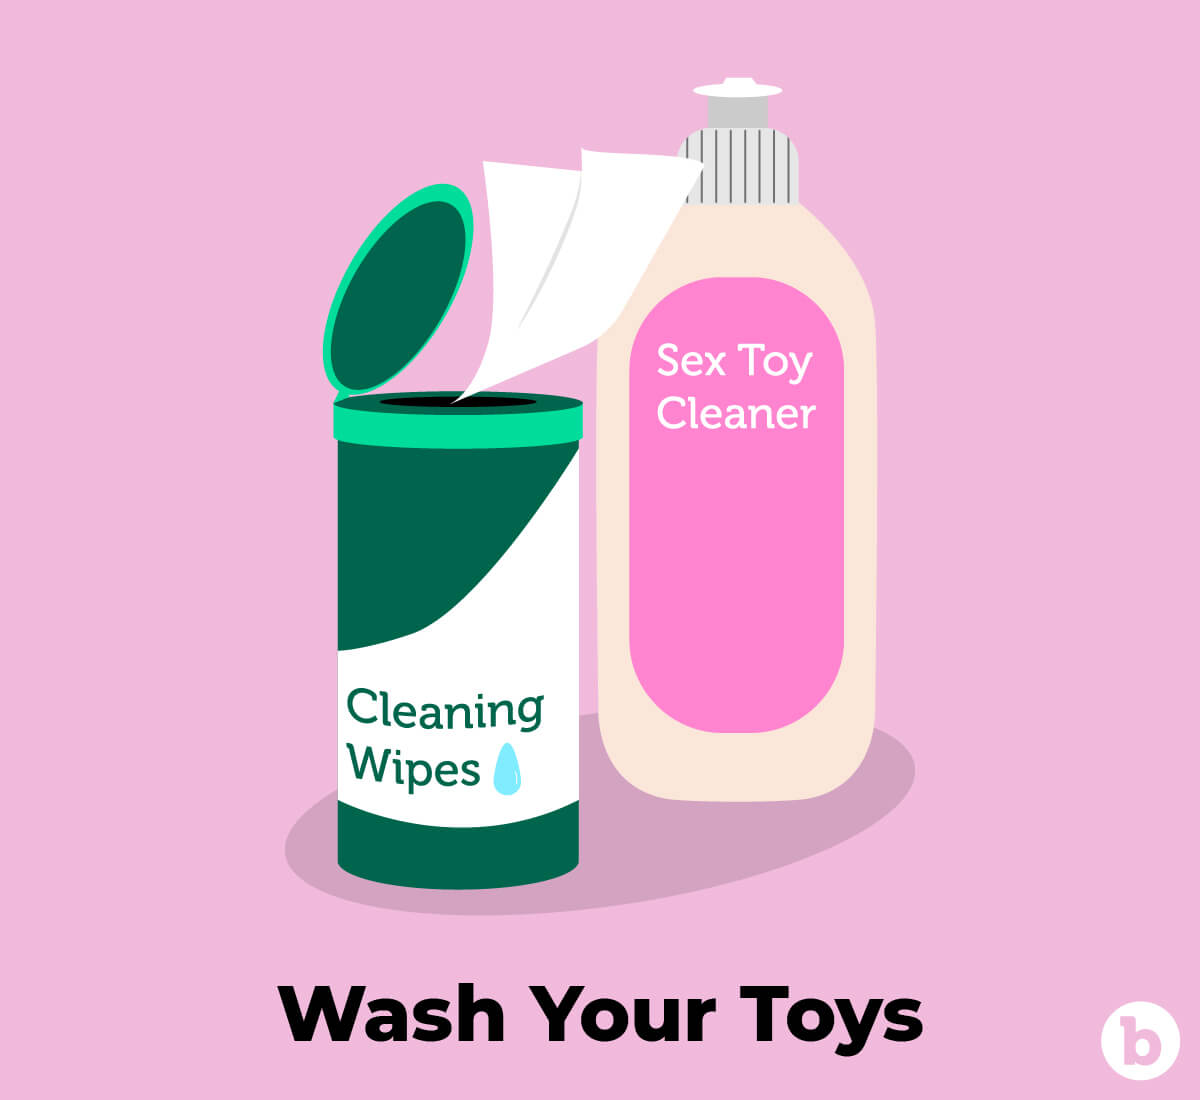 Washing your sex toys is equally as important as washing your hands